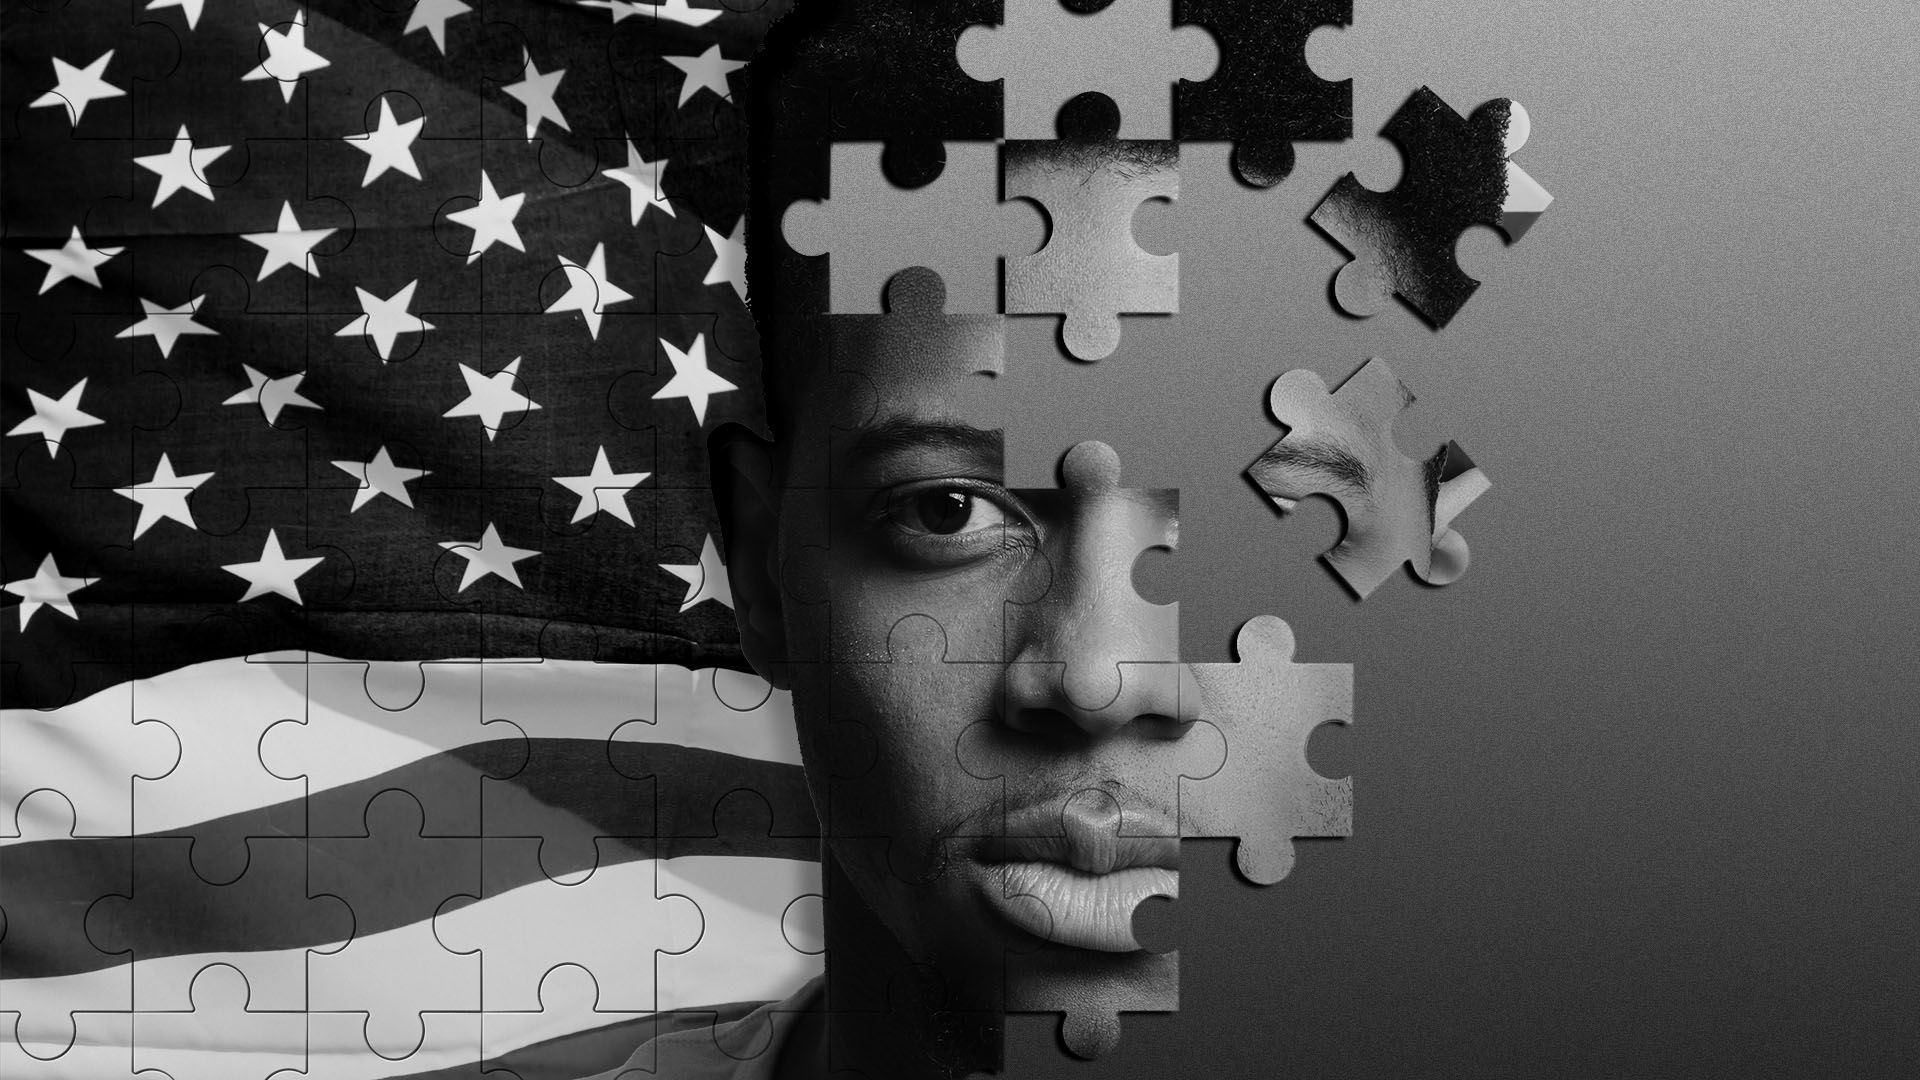 Illustration of an unfinished puzzle featuring an African American man against an American flag